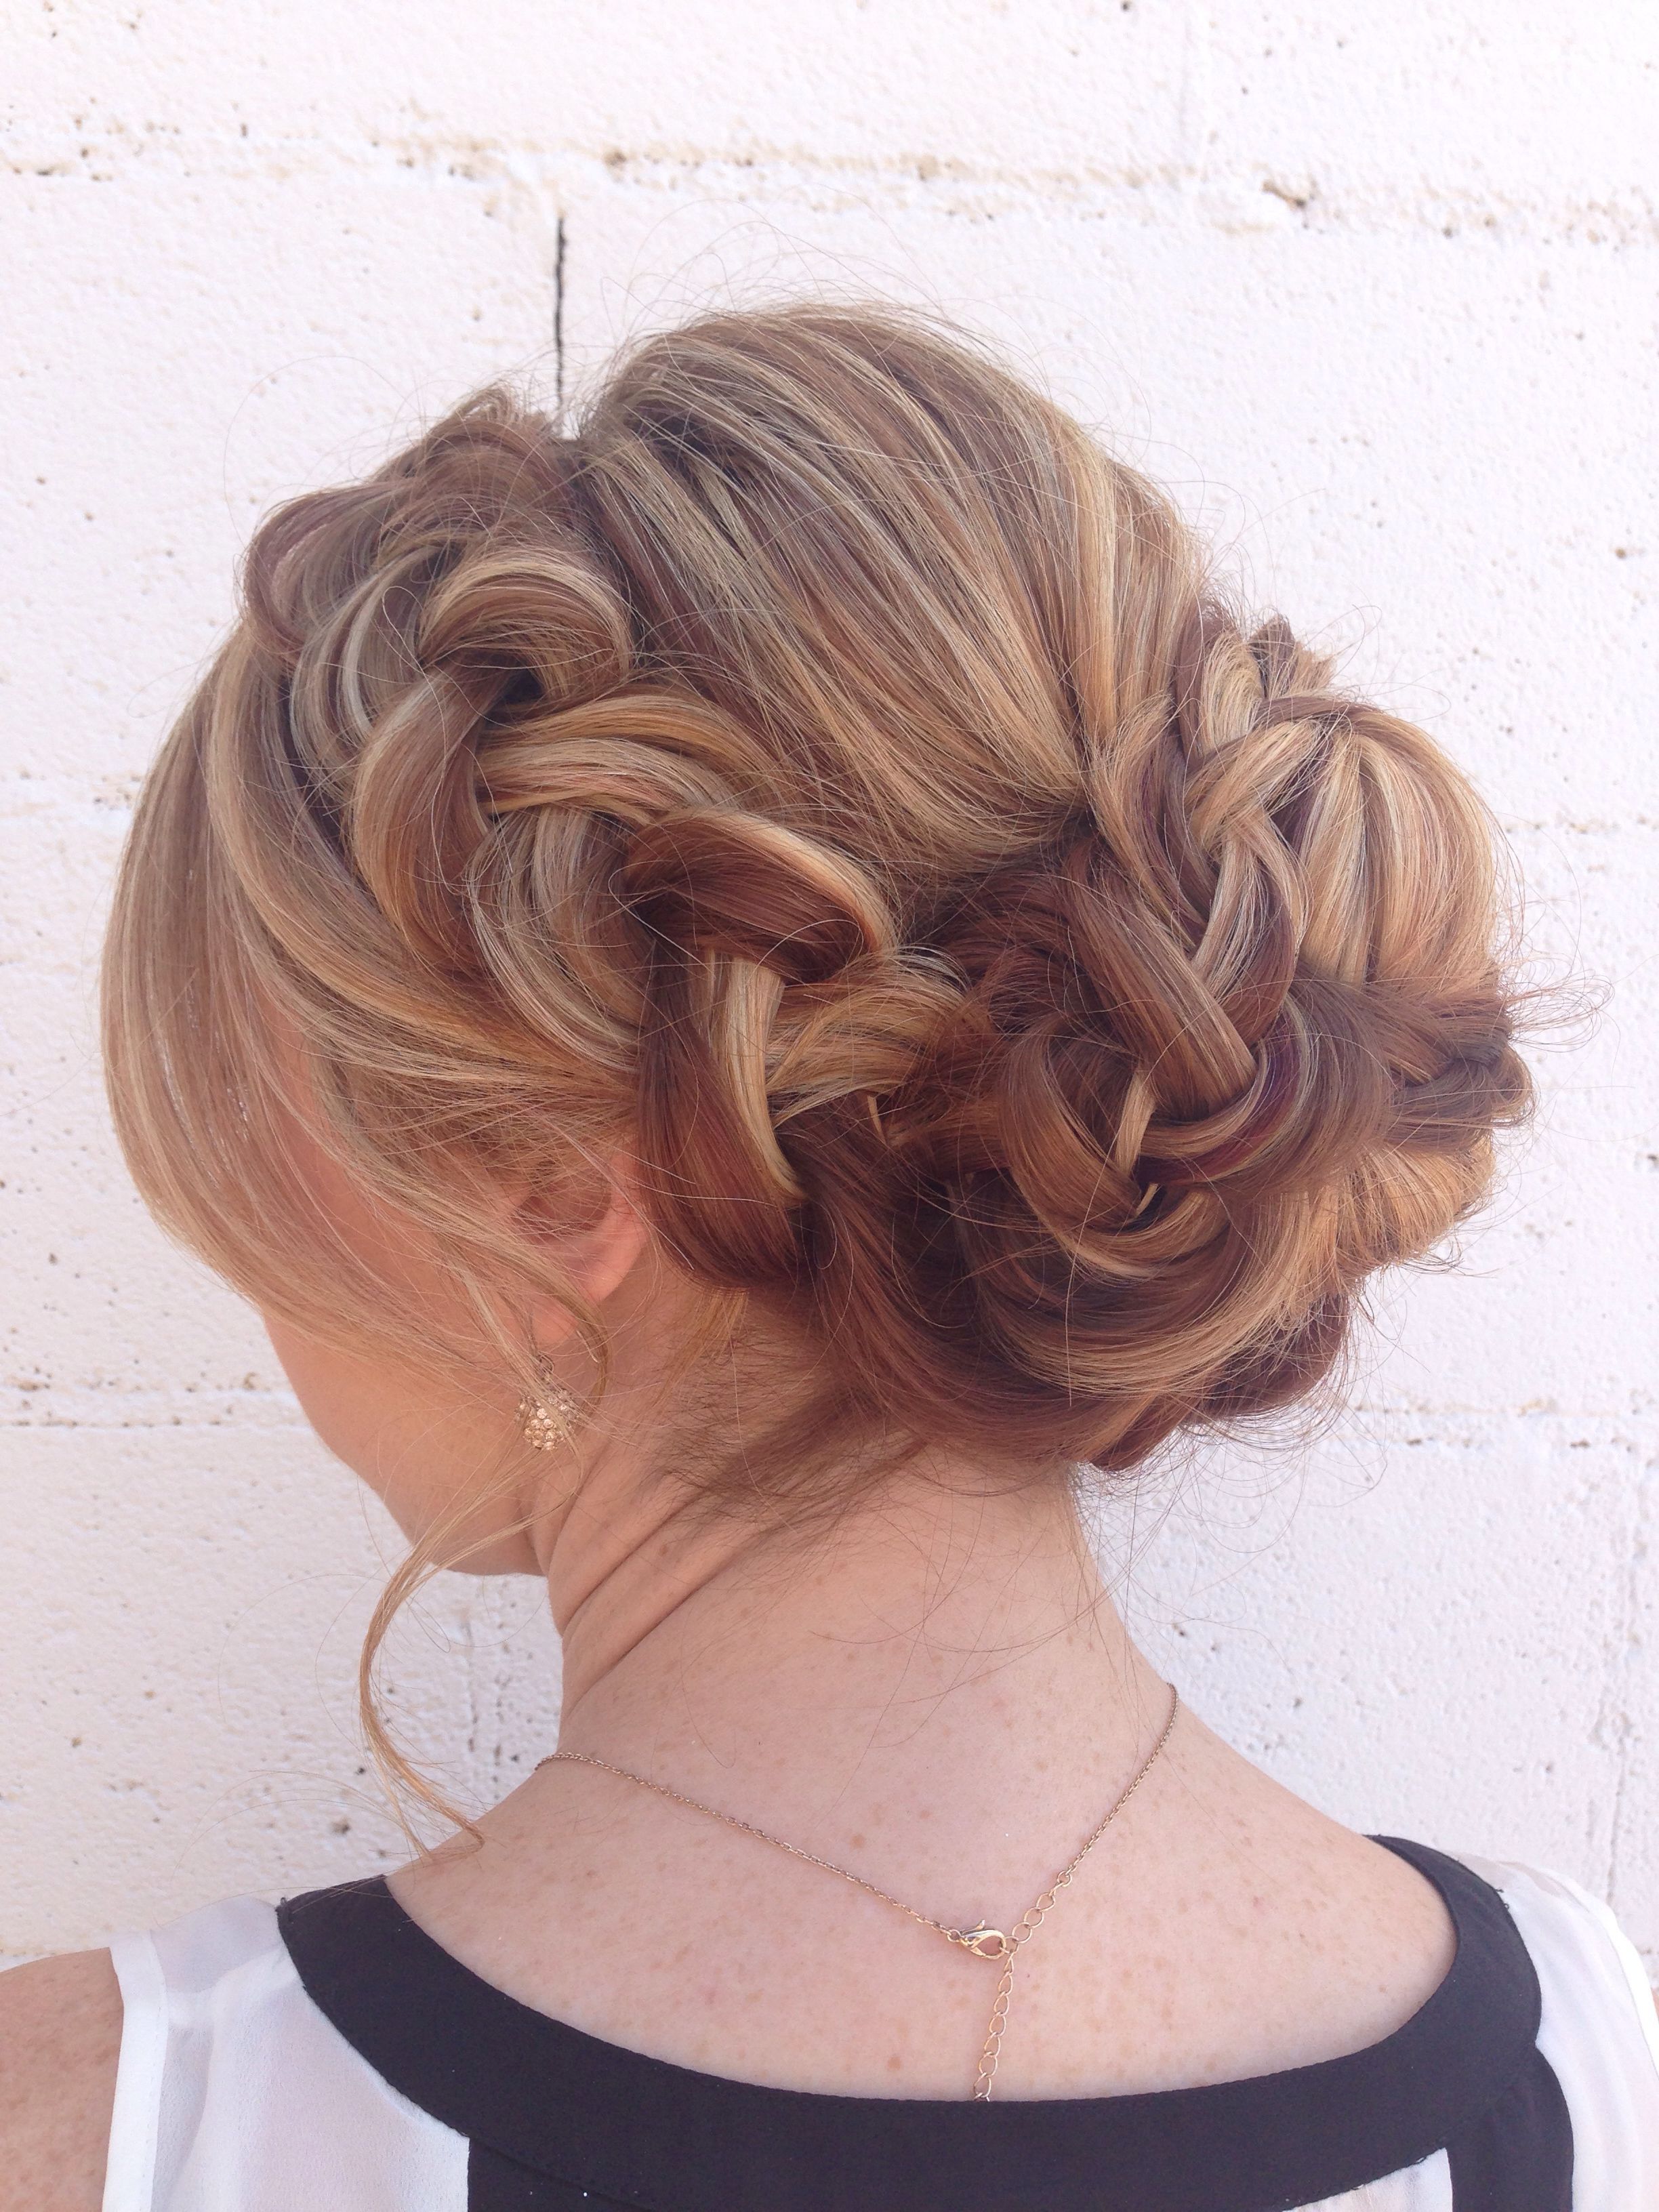 Soft, Braided Updo For Long, Thick Hair. | Thick Hair Updo, Prom Hairstyles  For Short Hair, Long Hair Styles Intended For Updo For Long Thick Hair (Photo 17 of 25)